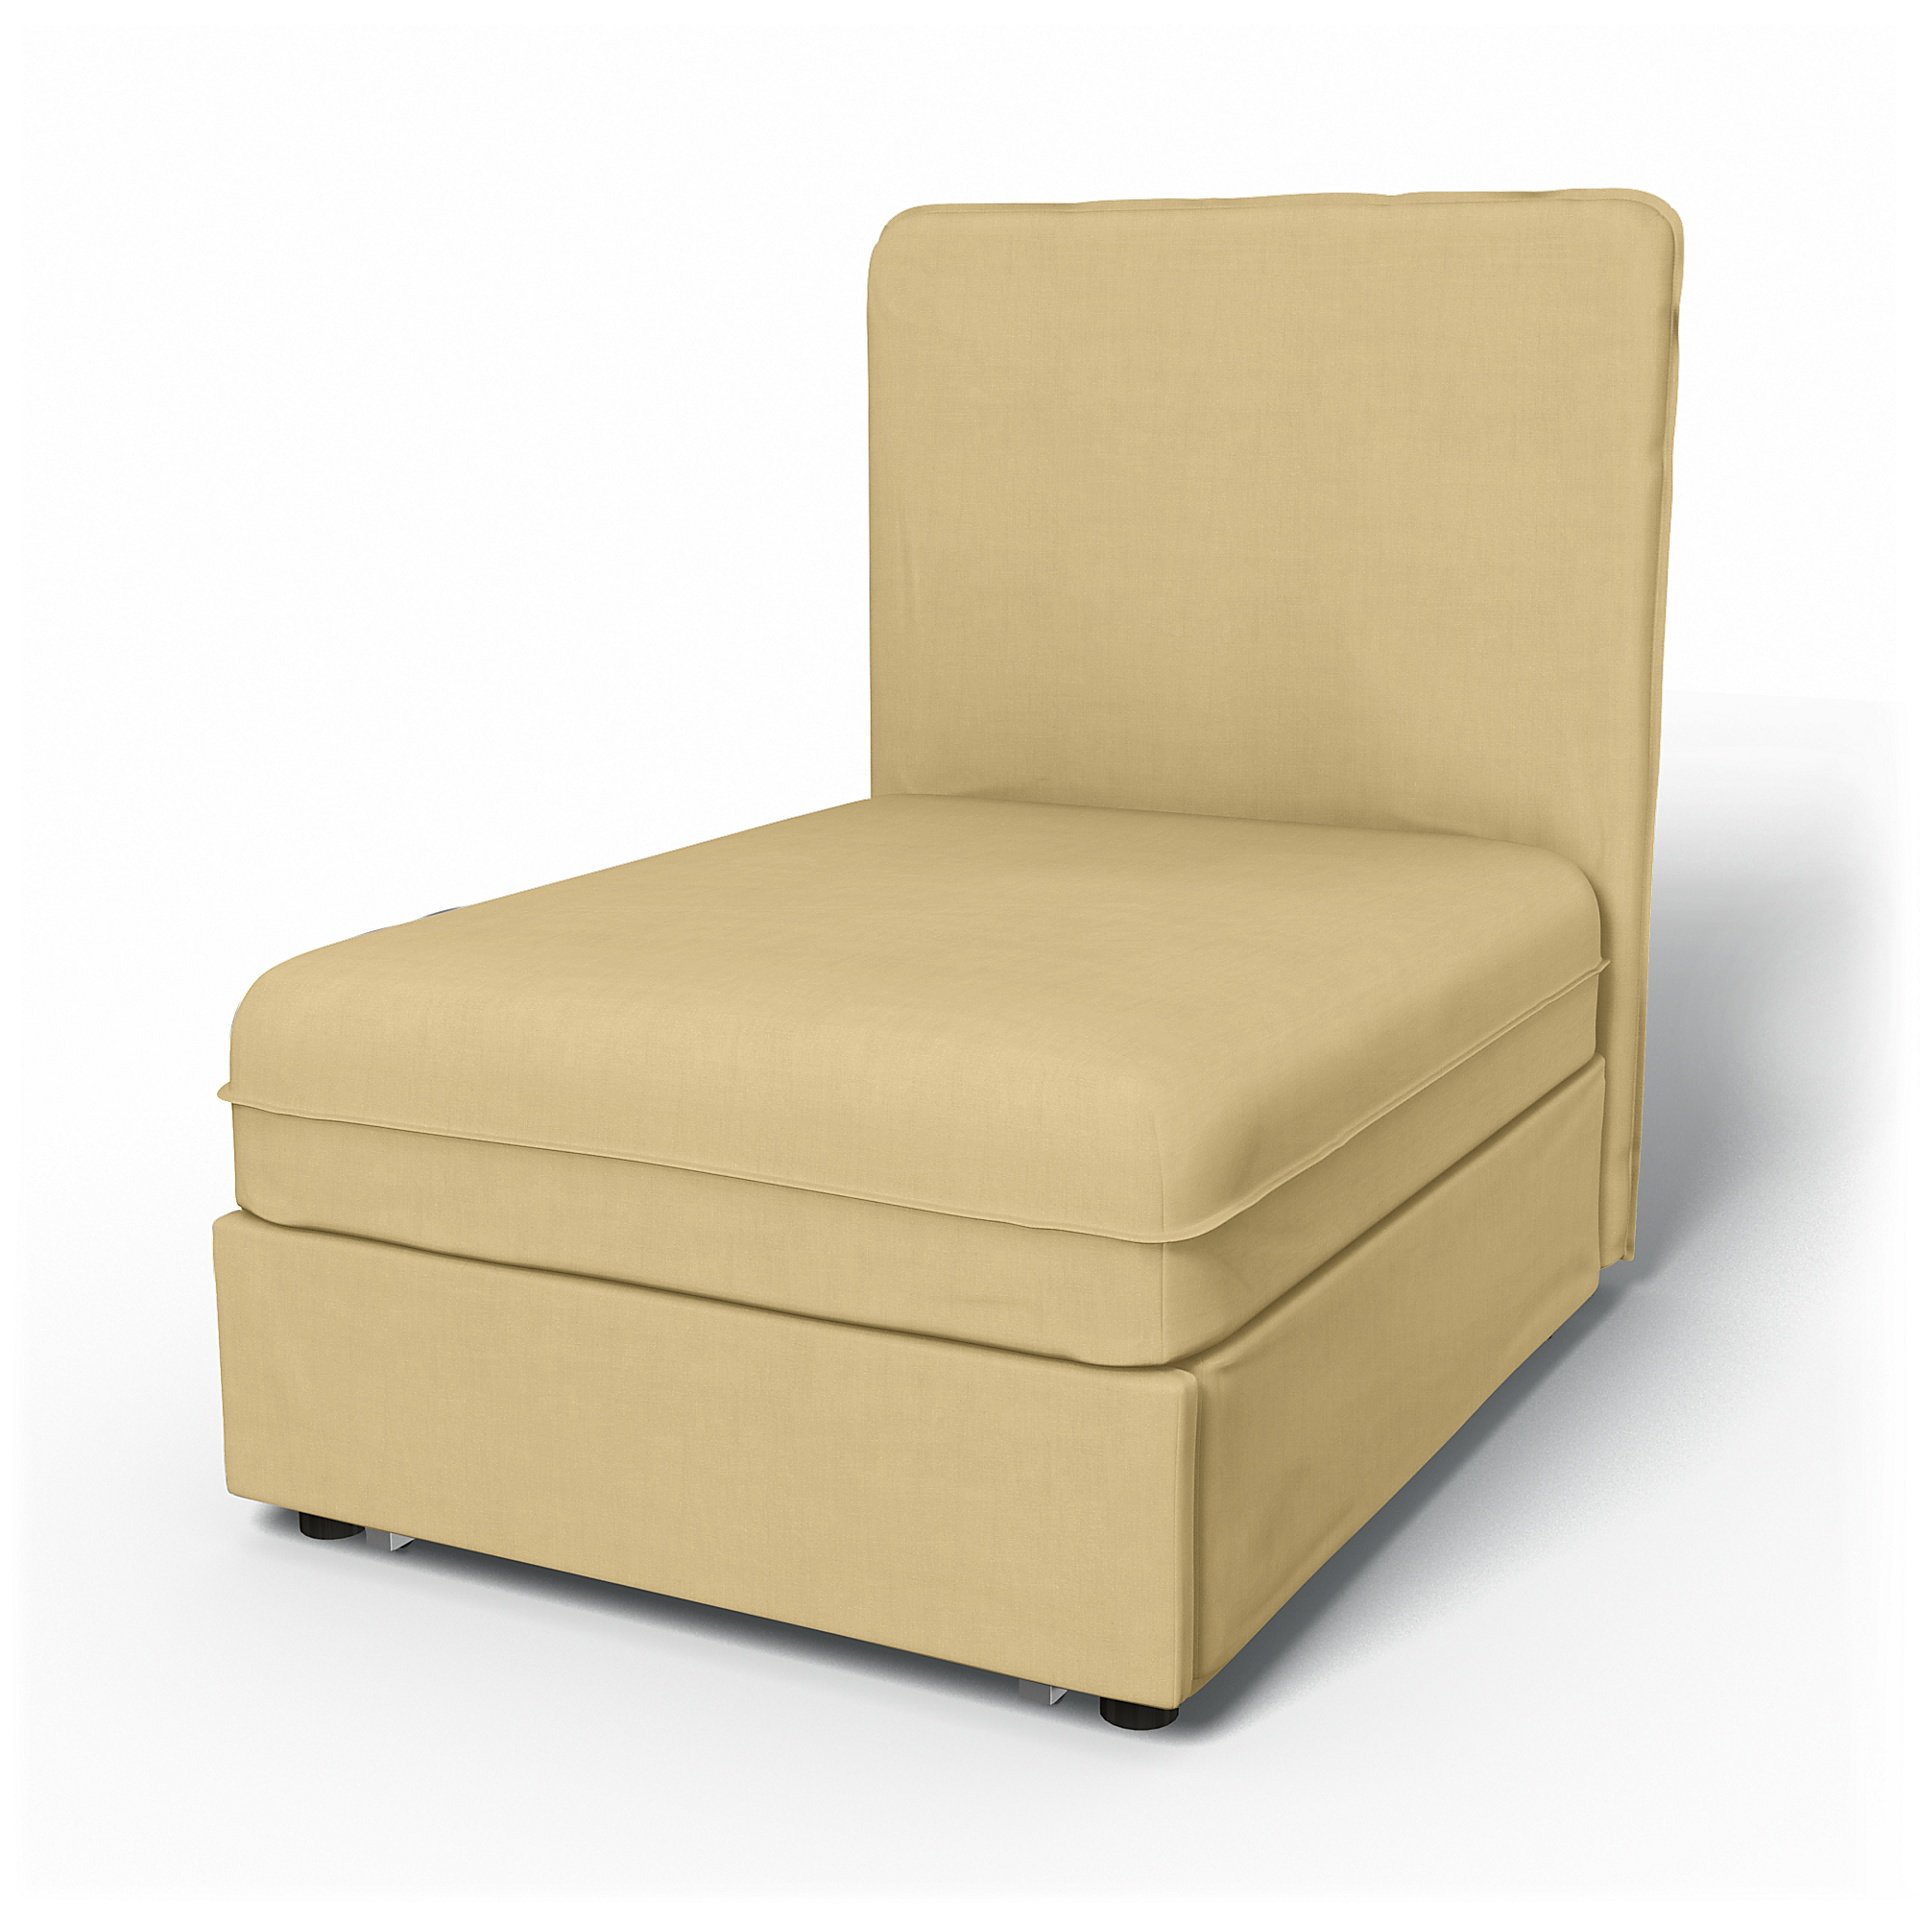 IKEA - Vallentuna Seat Module with High Back Sofa Bed Cover (80x100x46cm), Straw Yellow, Linen - Bem